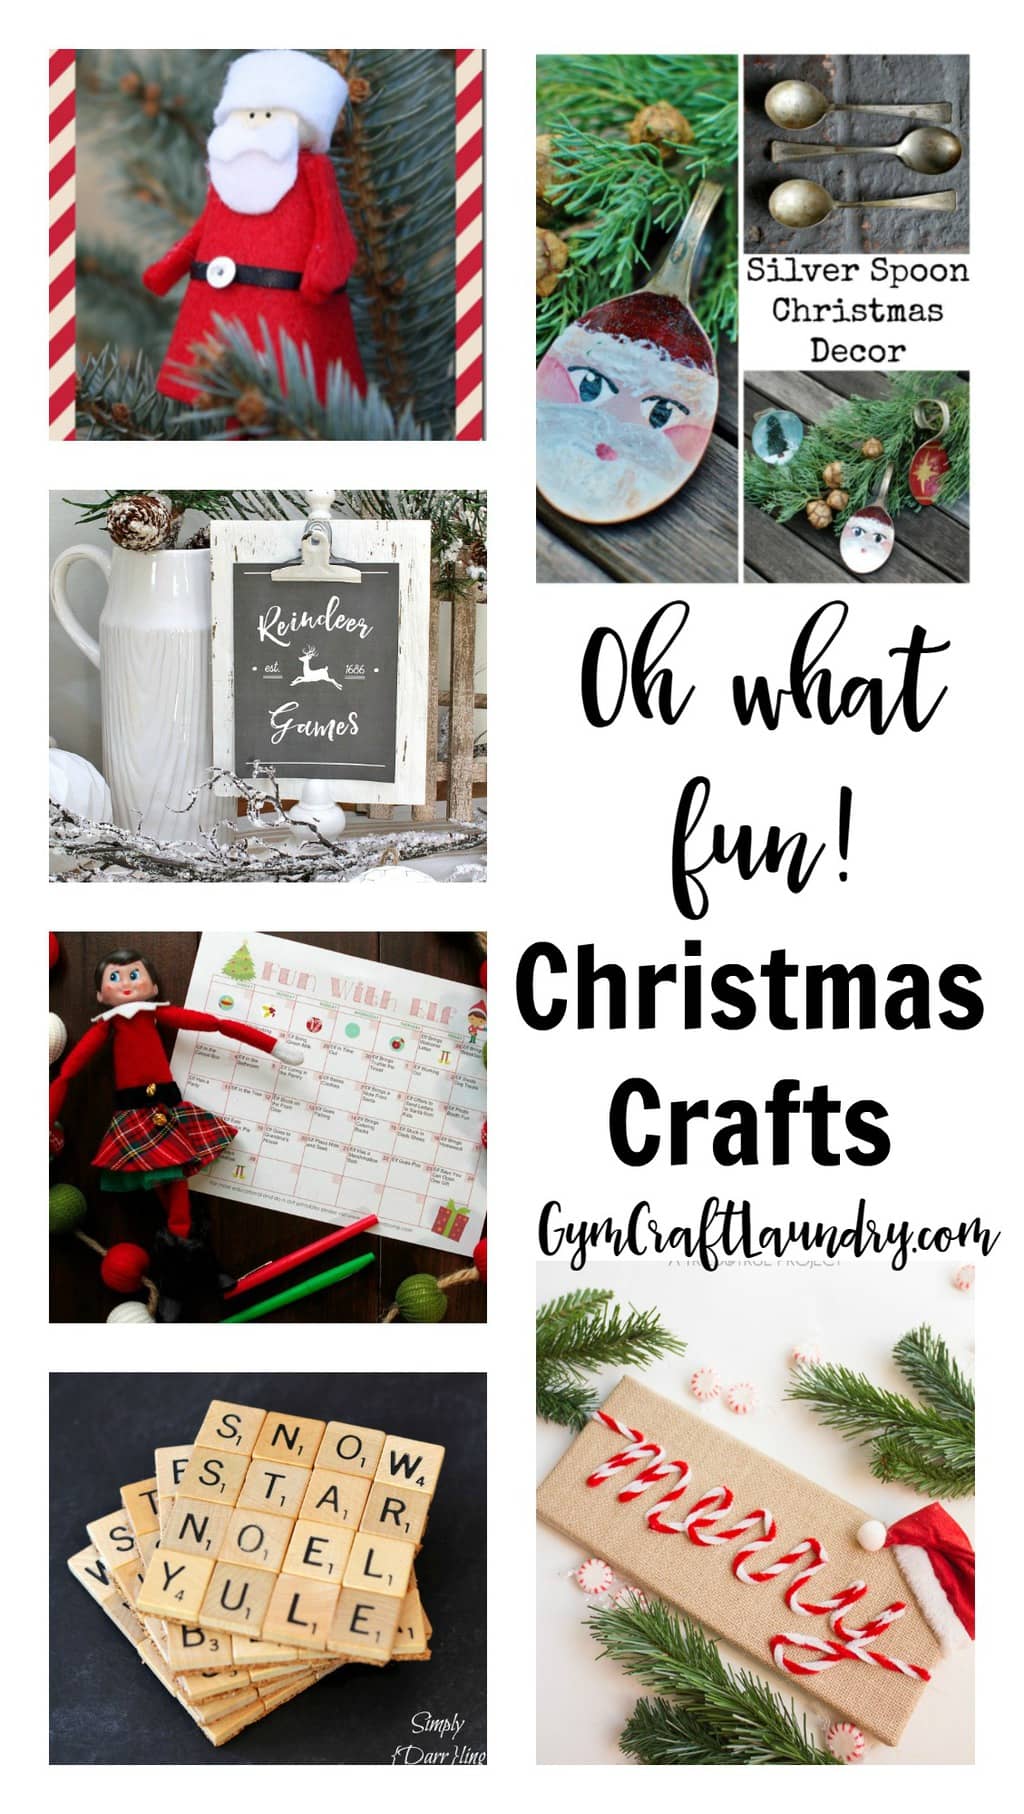 Get in the Holiday Spirit with Christmas Craft Projects! - Gym Craft ...